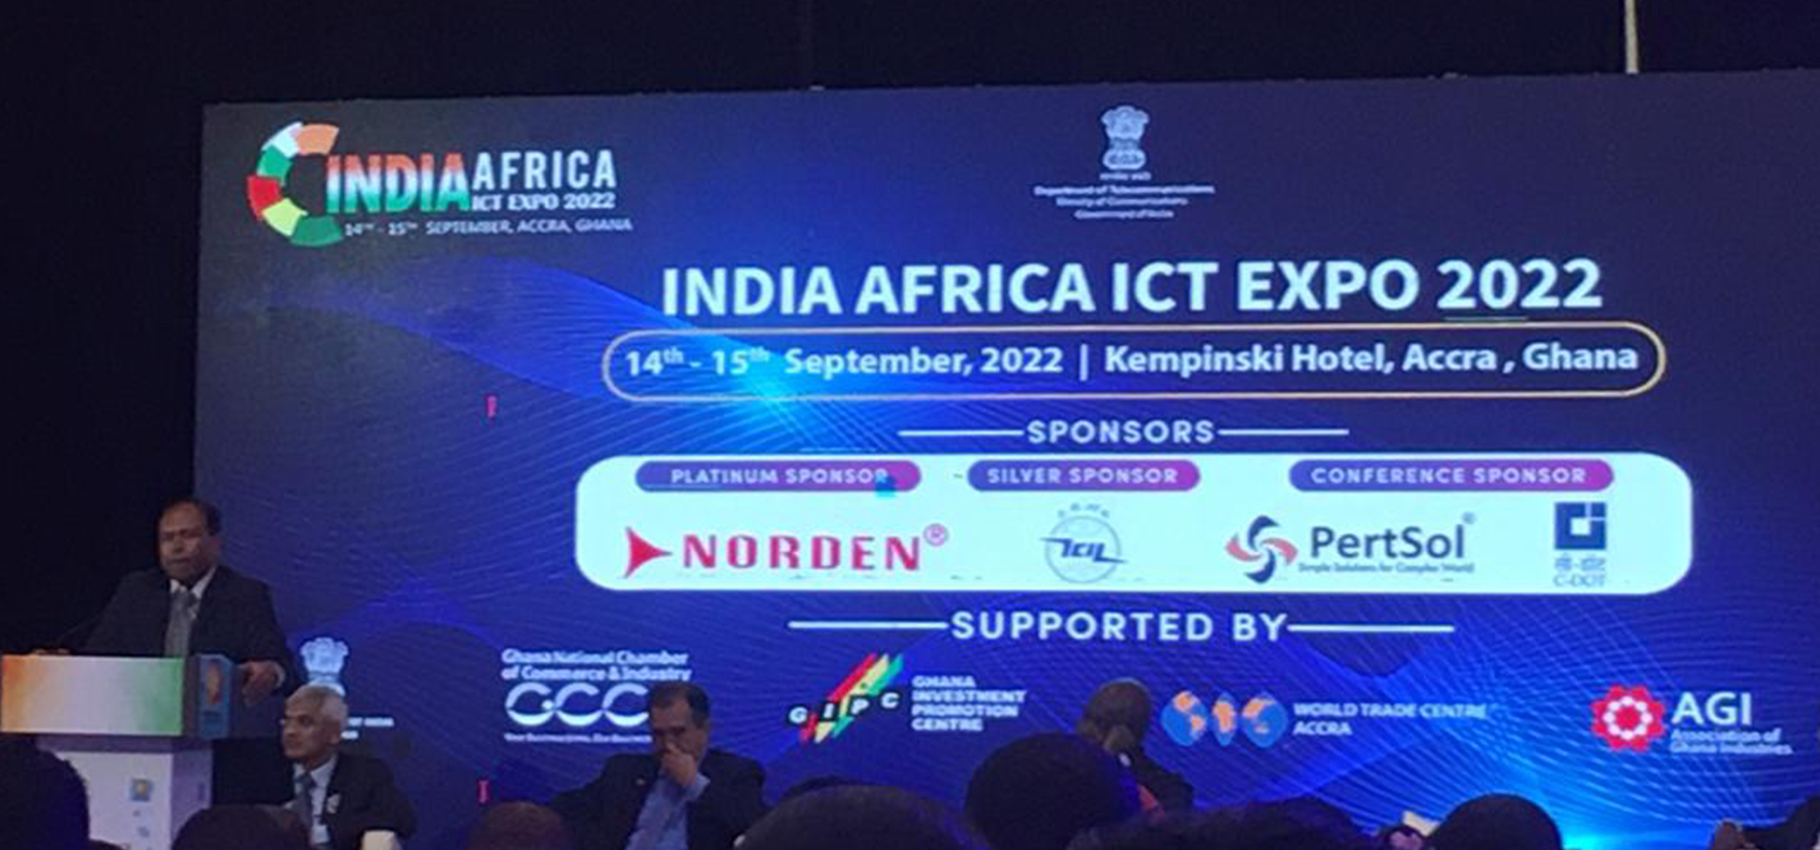 Africa Noted as the growing hub of ICT – India Africa ICT Expo.